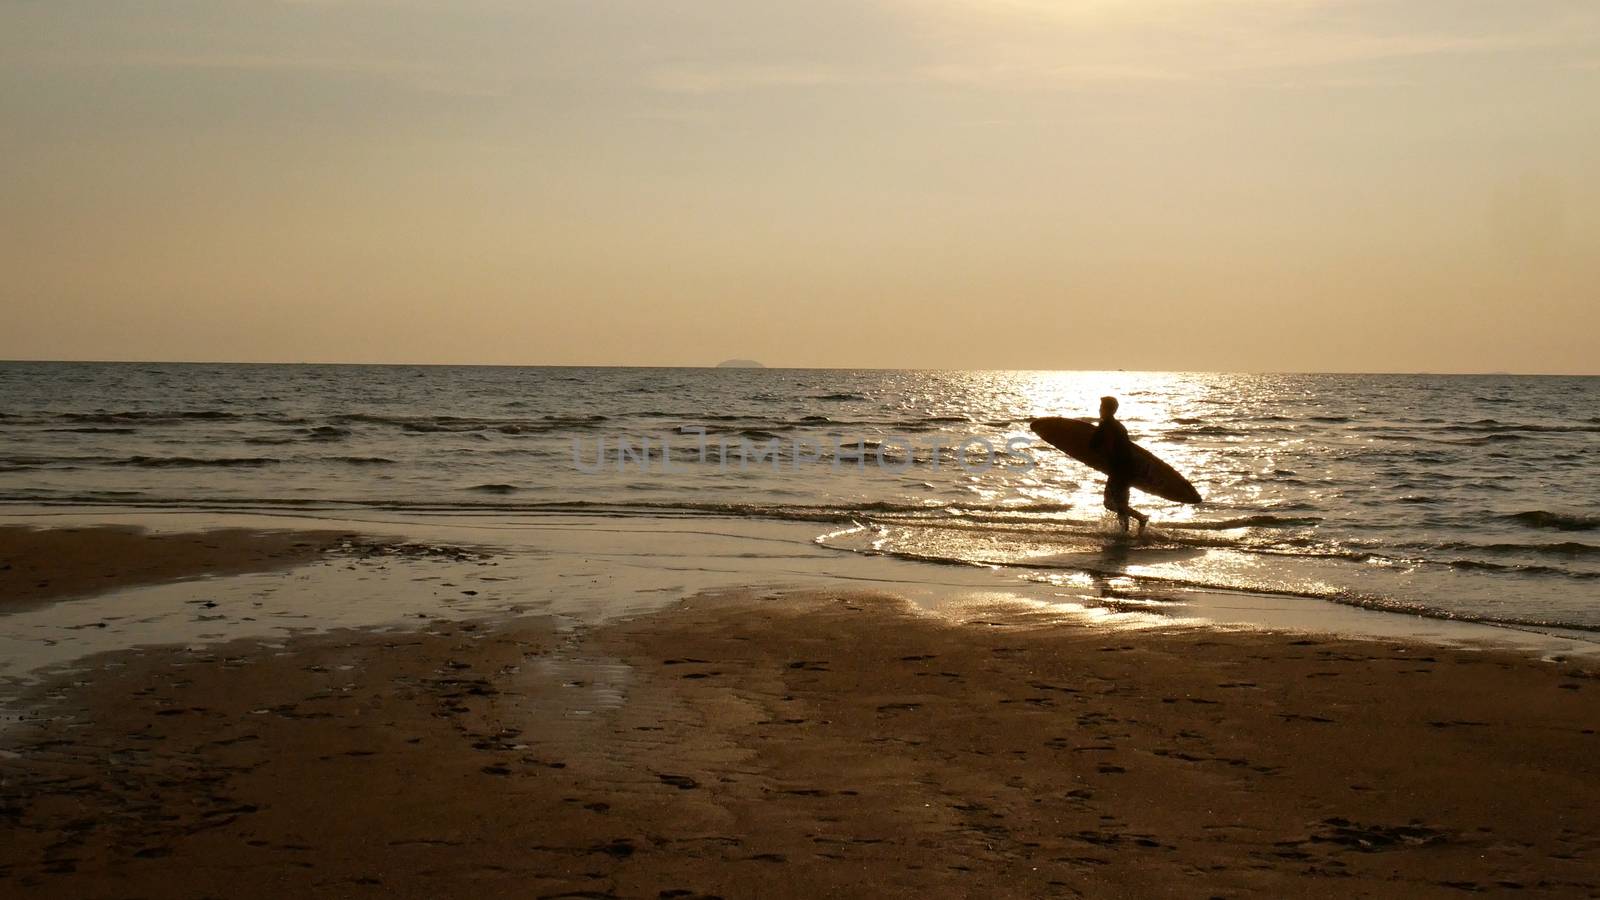 Silhouette of surf man with surfboard running on water surface. Surfing at sunset beach. Outdoor water sport adventure lifestyle.Summer activity. Handsome Asia male model in his 20s. by asiandelight